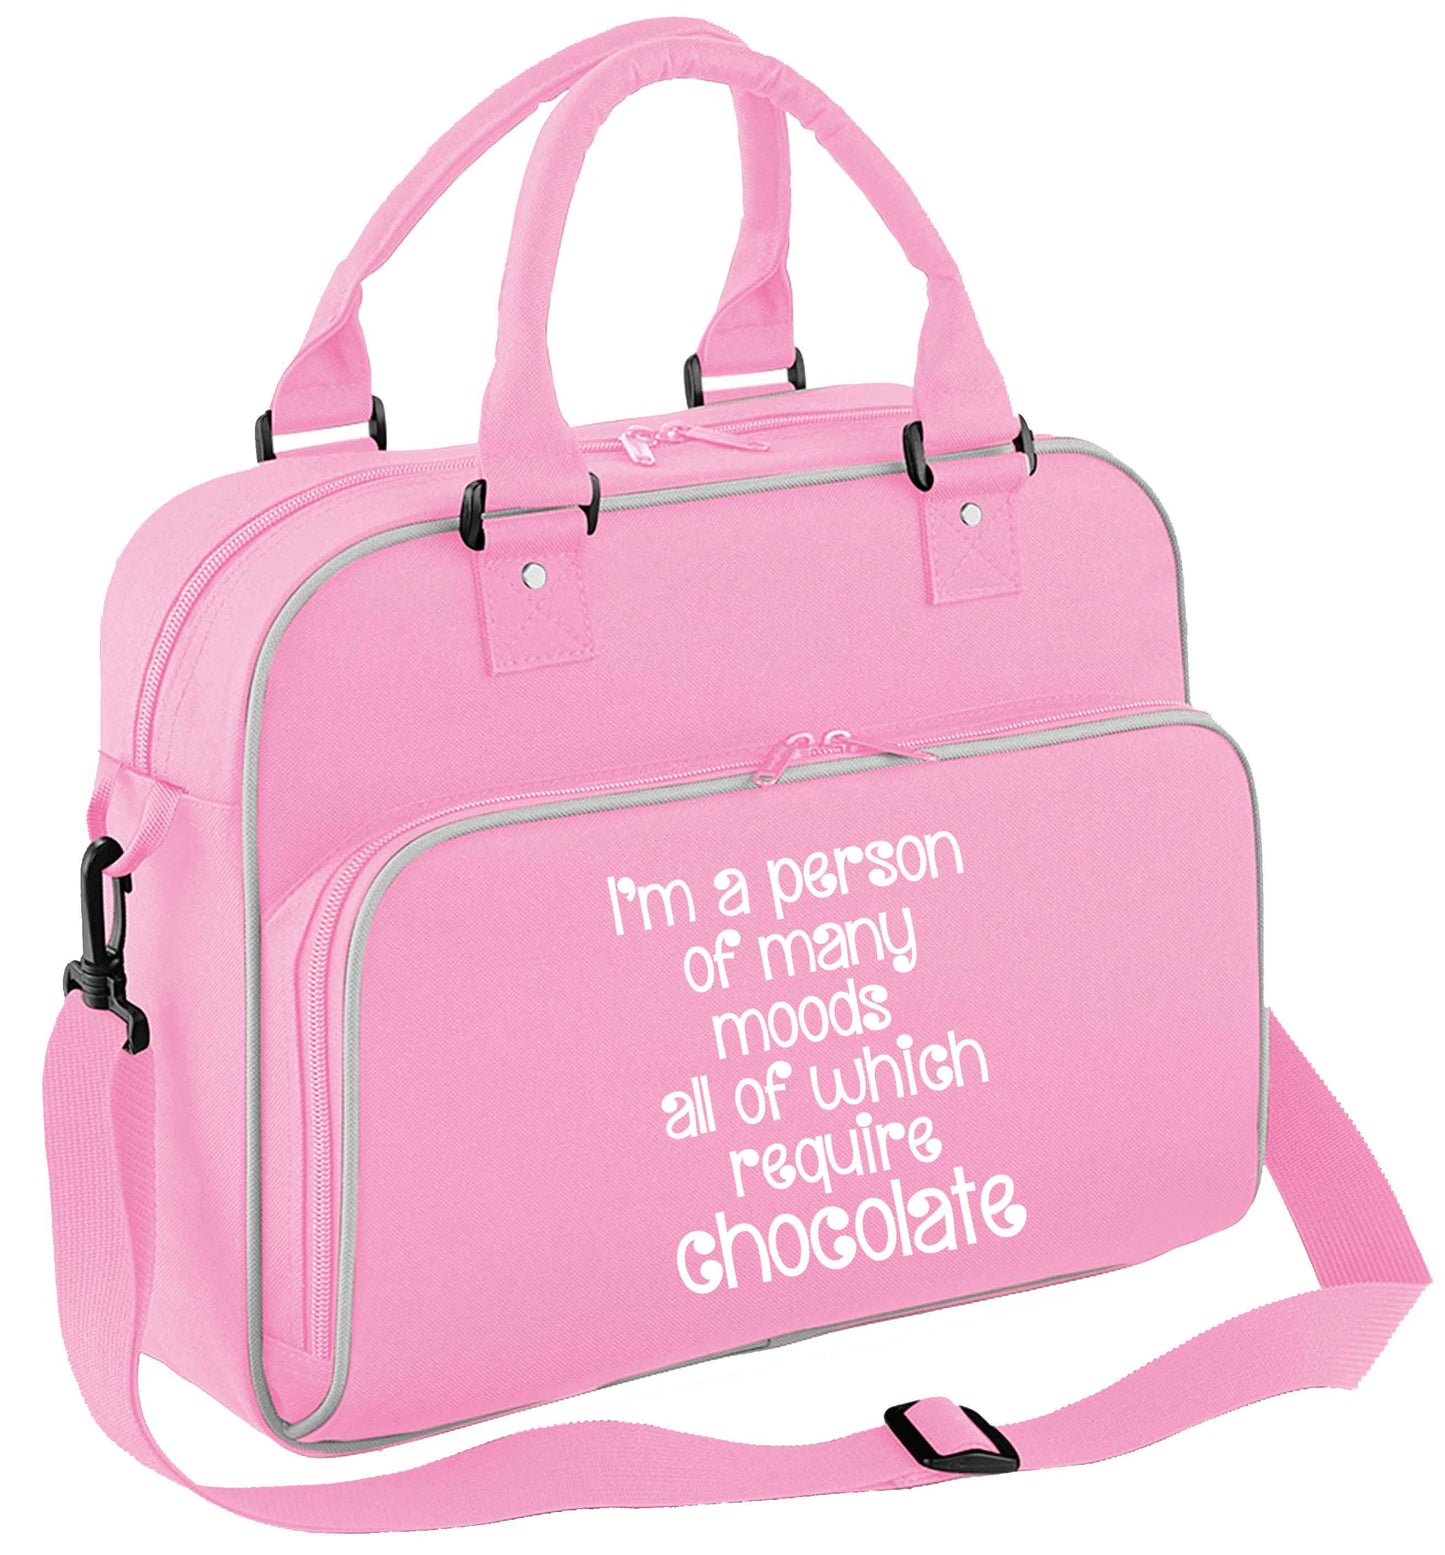 funny gift for a chocaholic! I'm a person of many moods all of which require chocolate children's dance bag baby pink